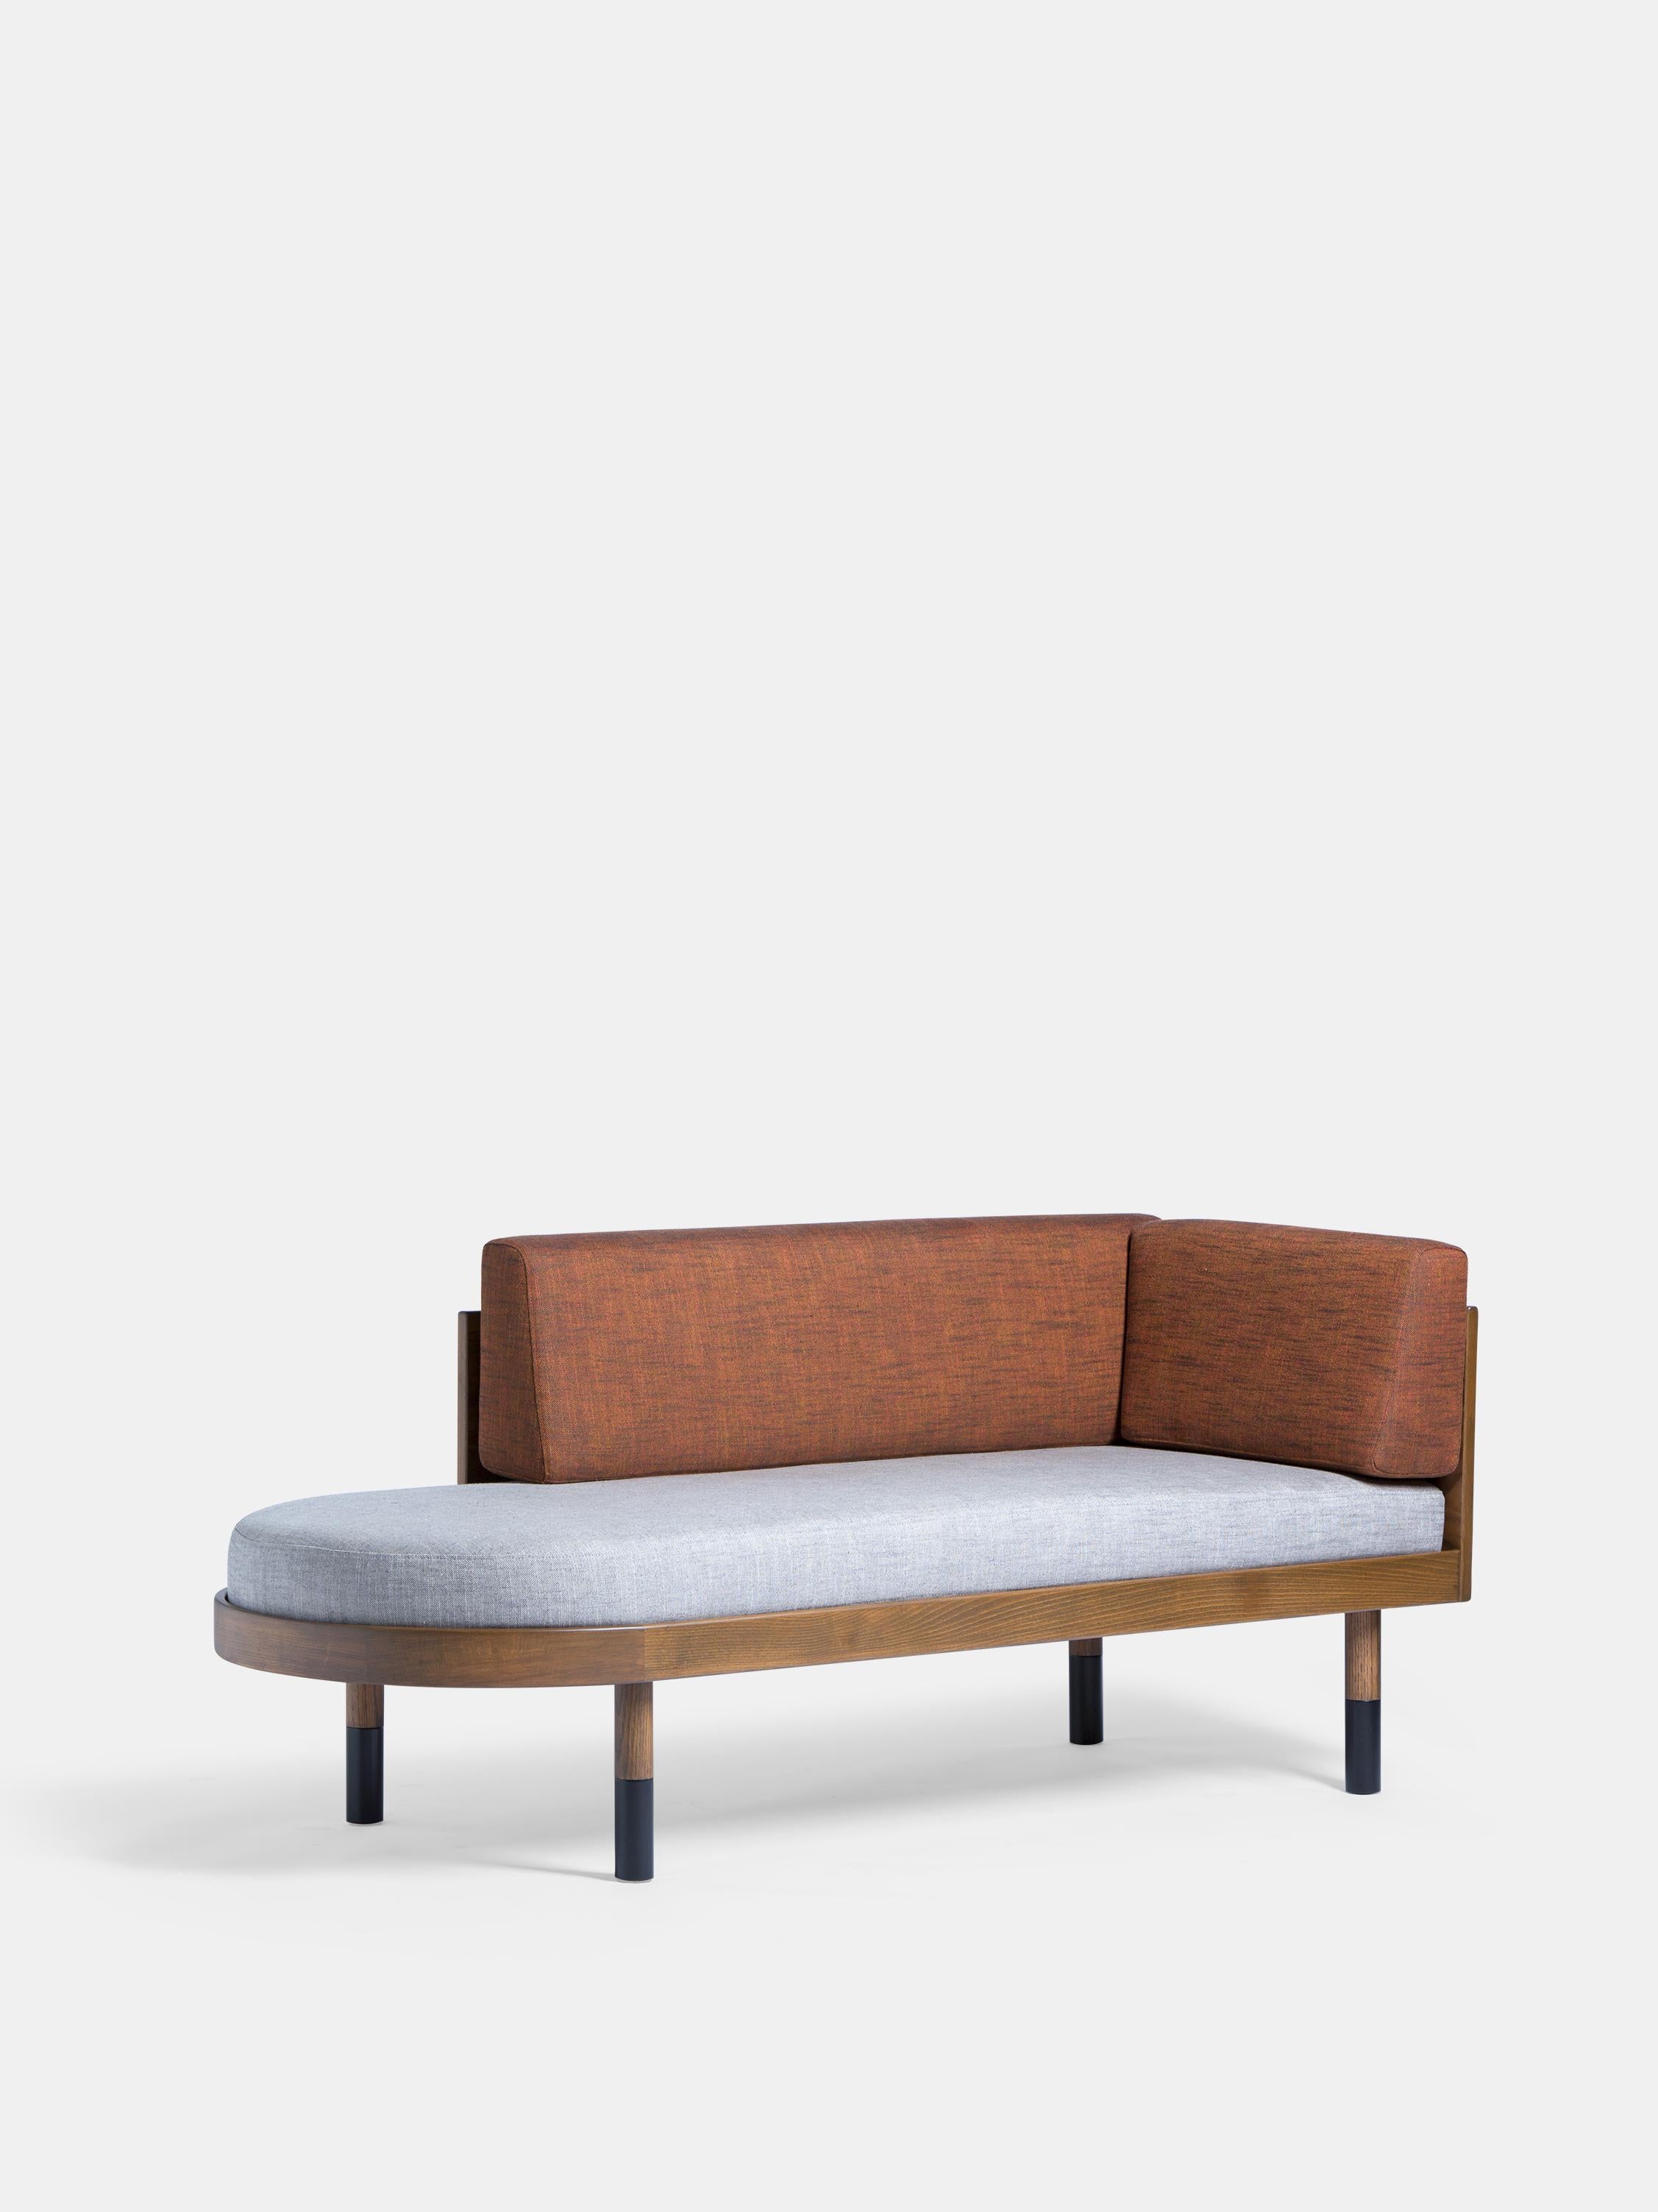 Mid Corner Sofa by Kann Design
Dimensions: D 70 x W 170 x H 74 cm.
Materials: Solid wood, steel, wood veneer, HR foam, fabric upholstery - seating: Sahco Ellis 4
- back: Sahco Ellis 18 (70% viscose, 30 % linen).
Available in other fabrics.

Designed